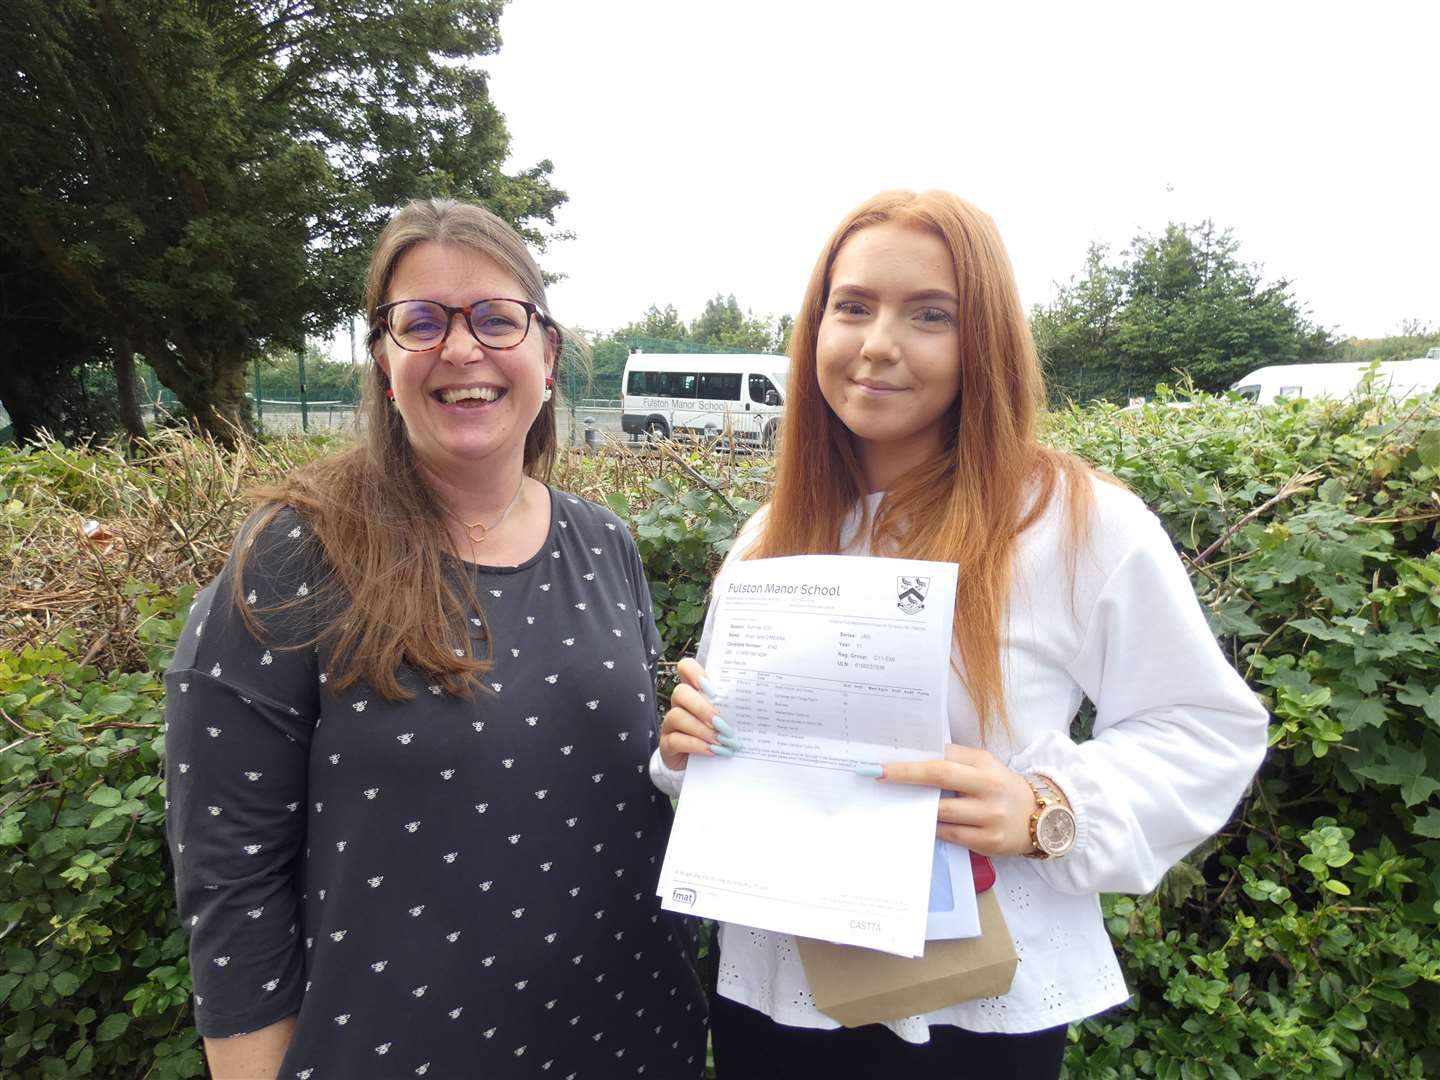 Fulston Manor's head of school Susie Burden with Anya O'Meara who was picking up her GCSE results at Sittingbourne